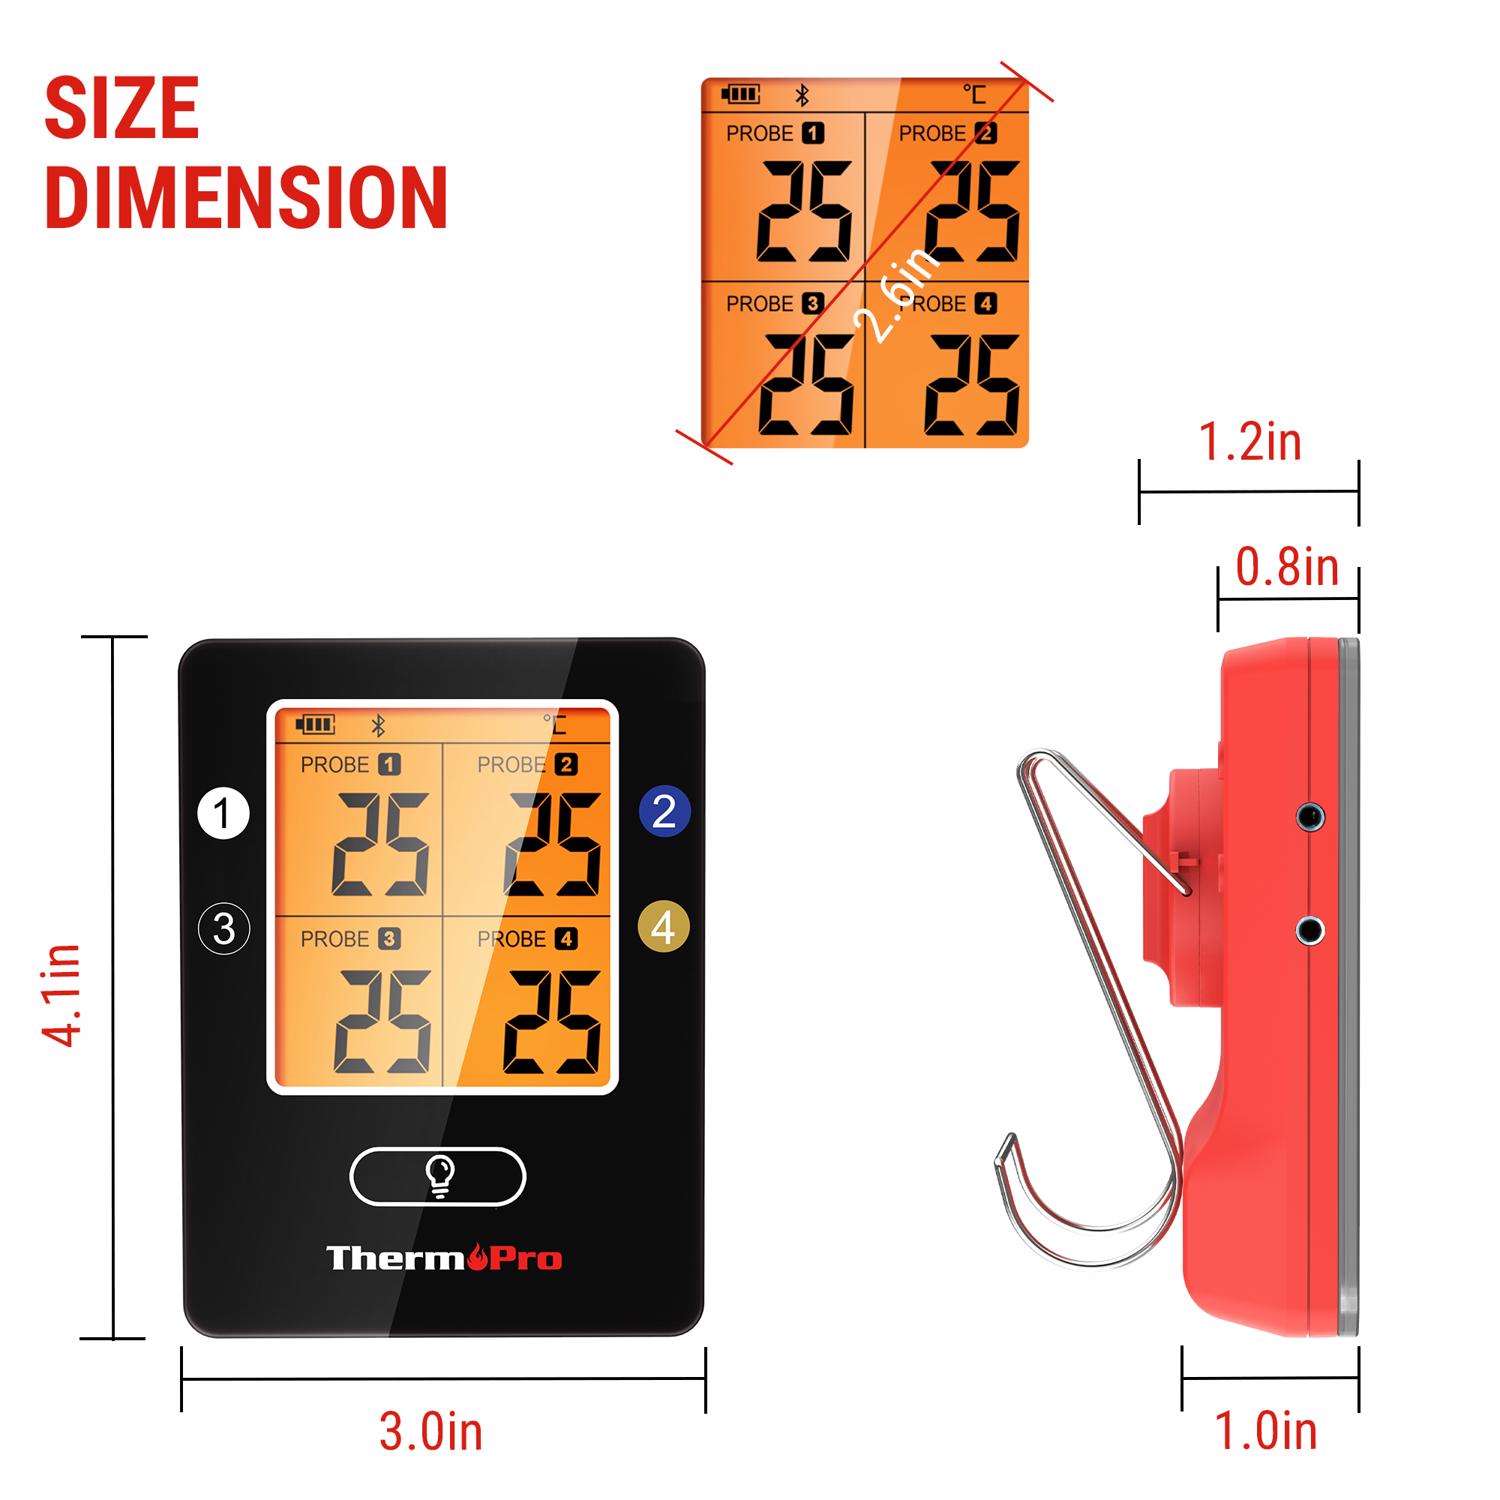 CT-10 Candy & Oil Bluetooth Thermometer